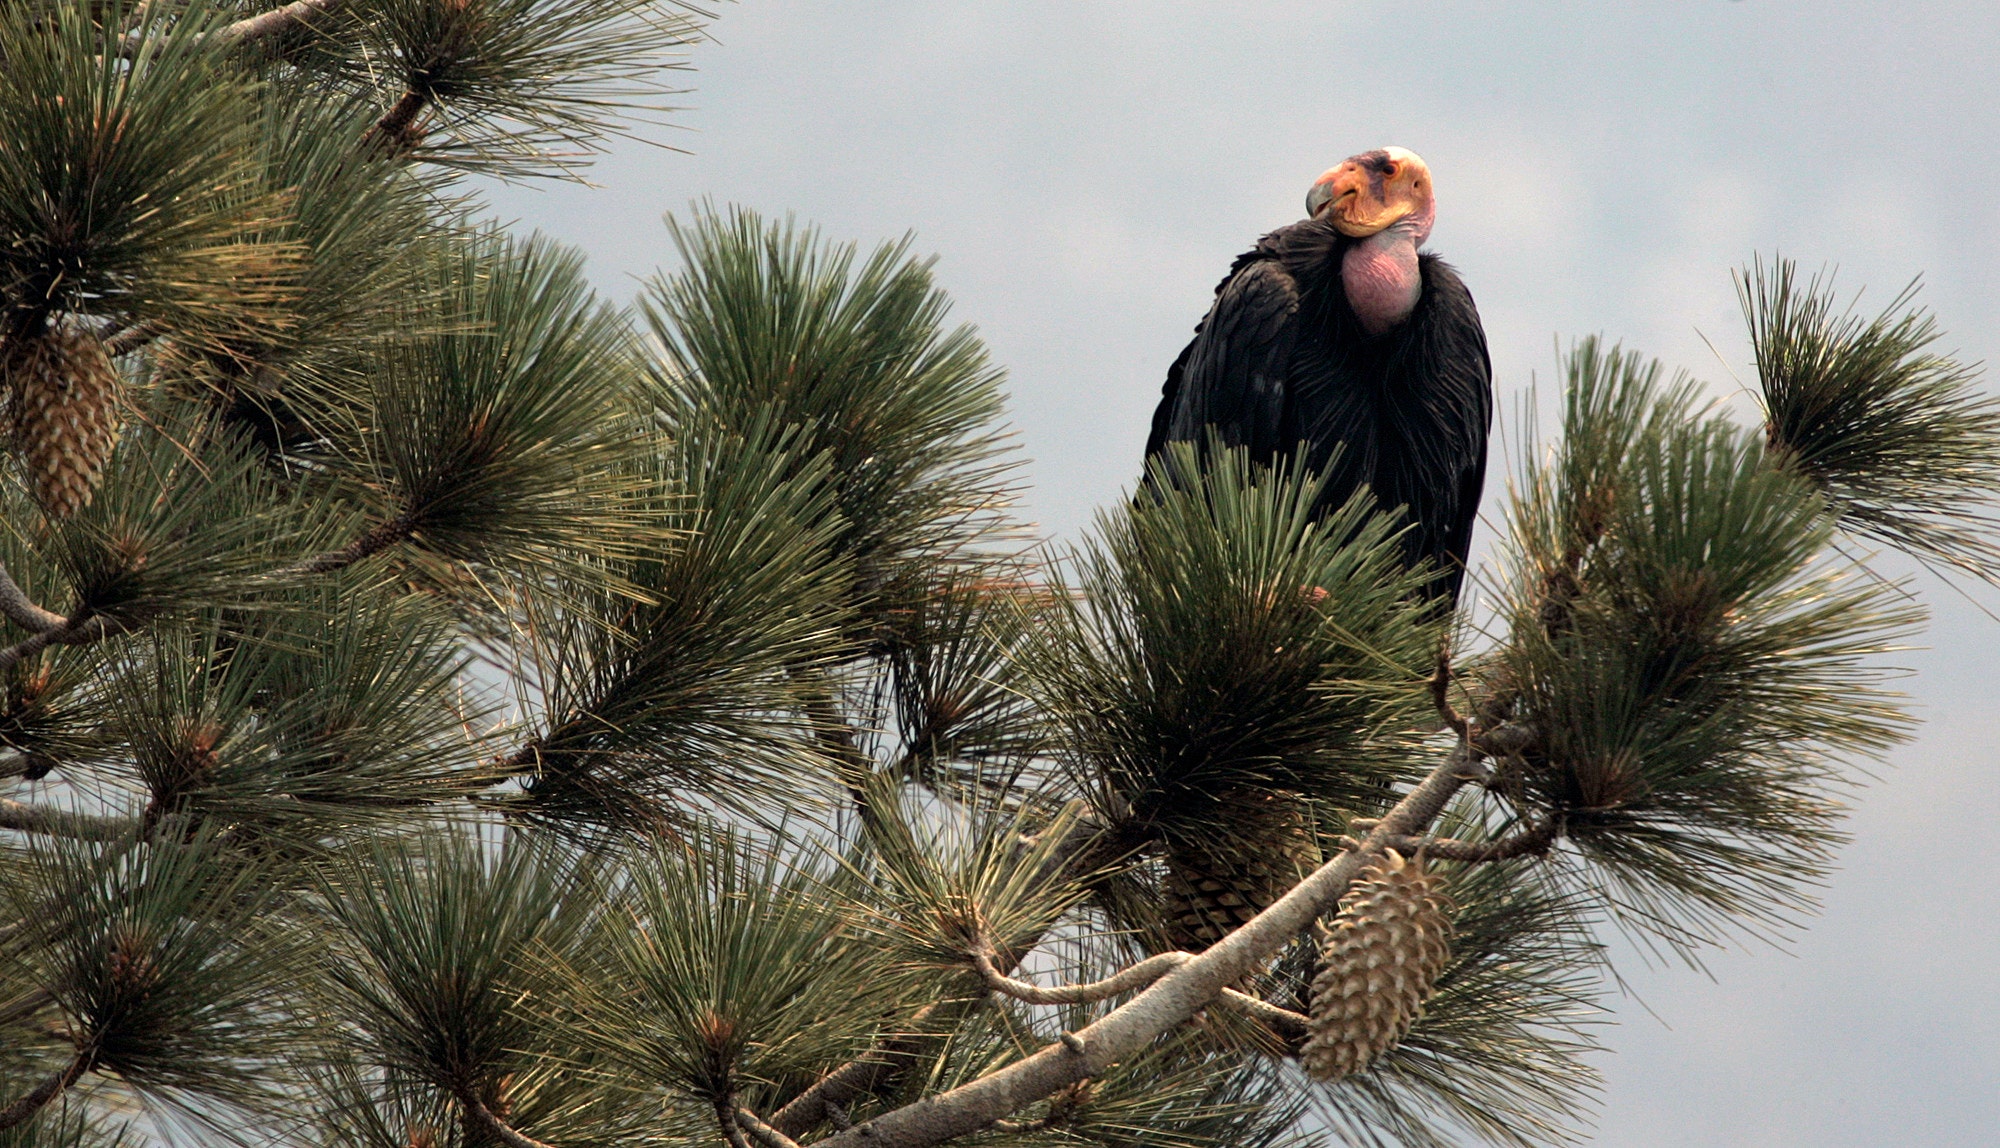 Endangered California condors released in Redwood National and State Parks for first time since 1892